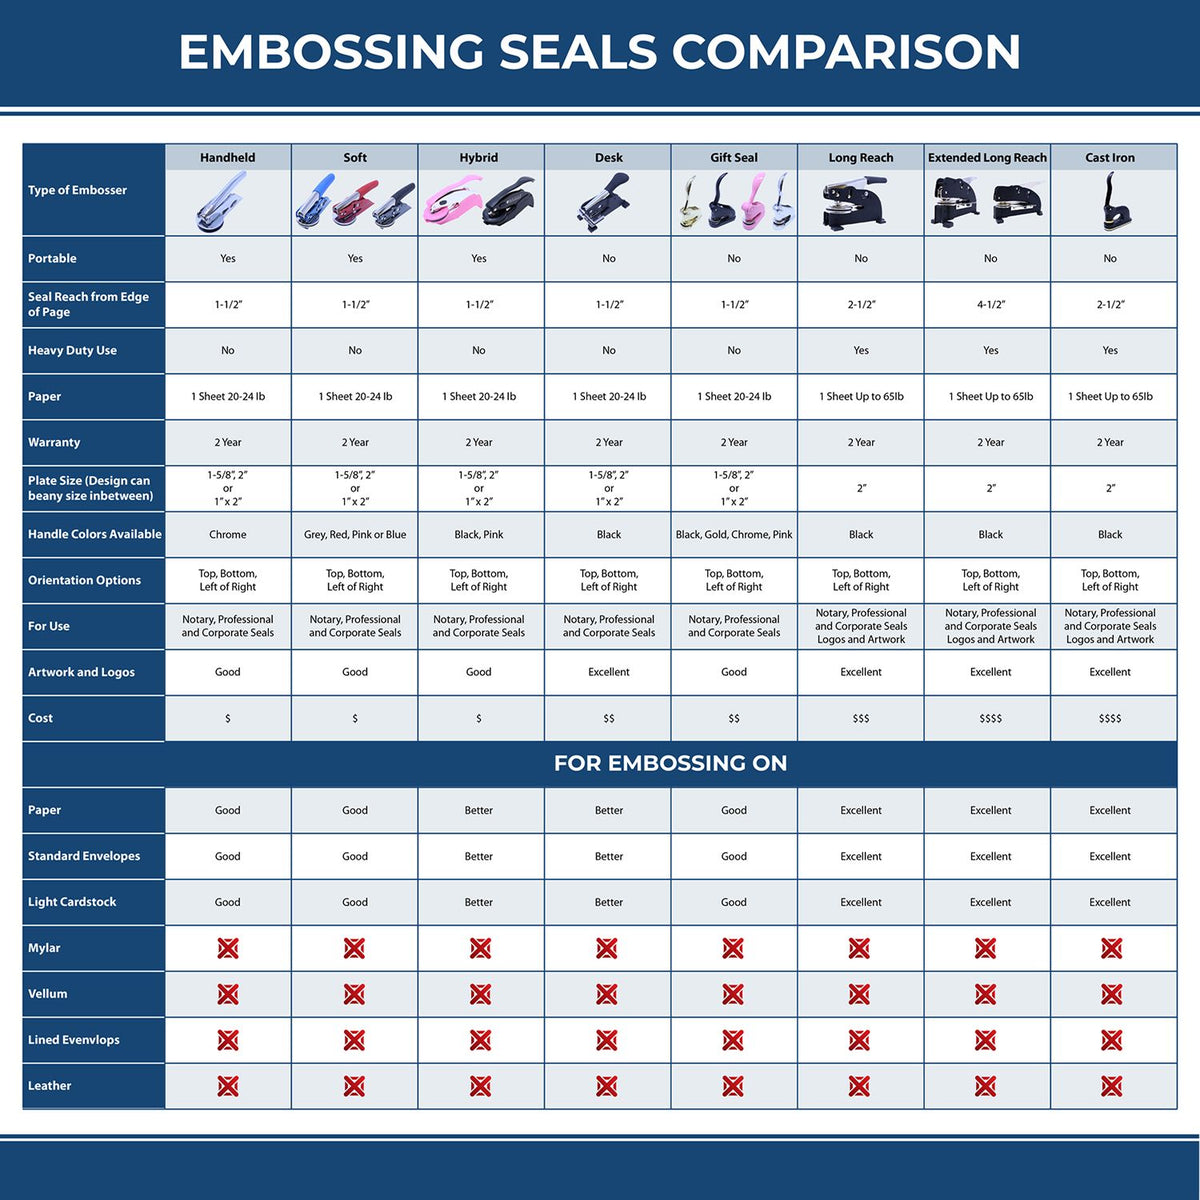 A comparison chart for the different types of mount models available for the Kentucky Engineer Desk Seal.